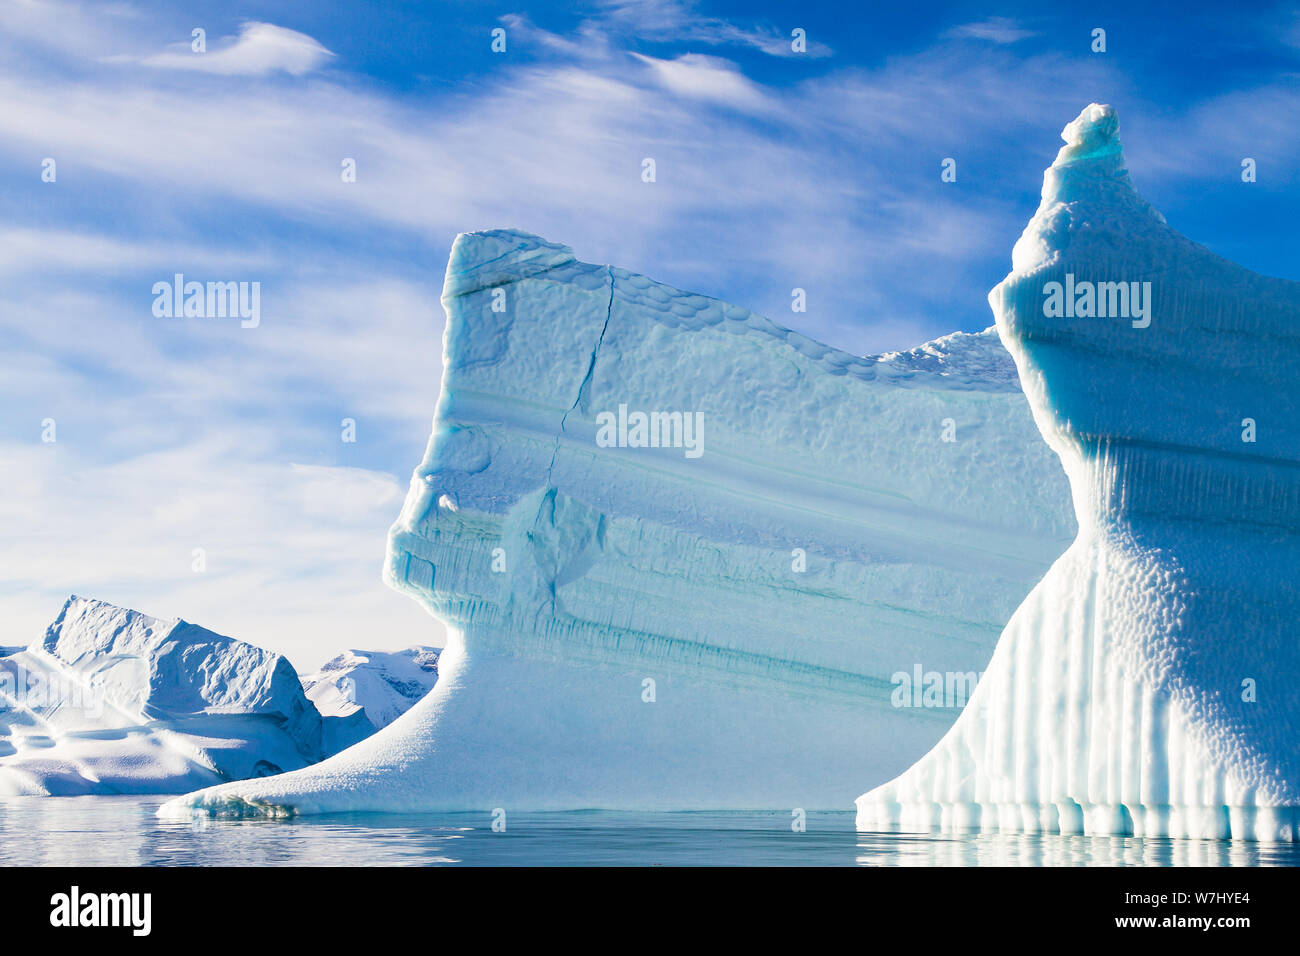 Two towering icebergs stand firmly in the freezing waters of Scoresby Sund, in Eastern Greenland.  Both layered in contrasting ribbons of smooth and fluted ice, the top of the right berg is lit by the sun like a glowing blue torch. Stock Photo